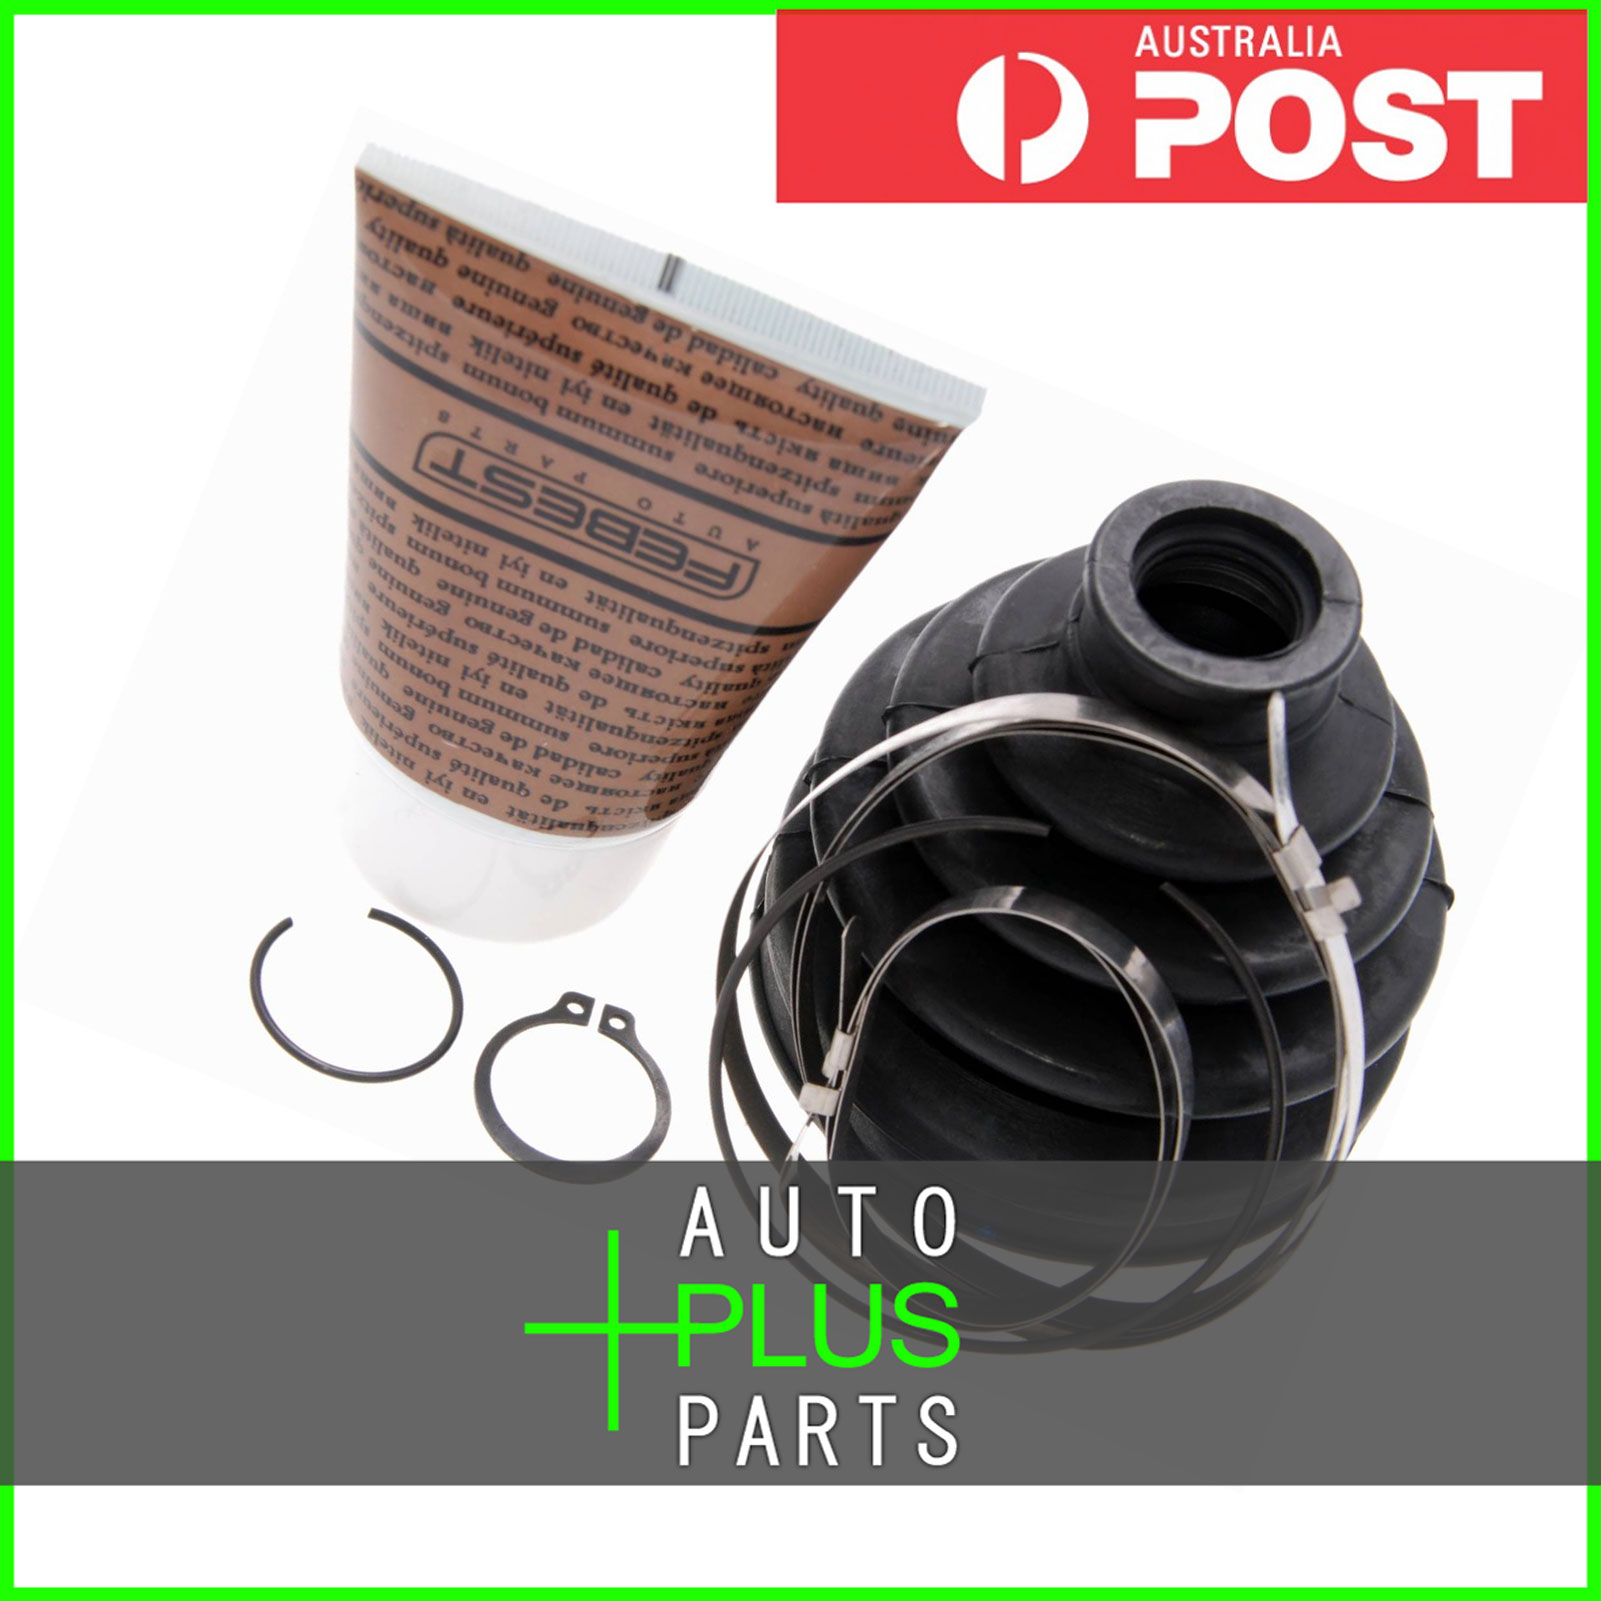 Fits SUBARU LOYALE A11 1989-1994 - Boot Outer Cv Joint Kit 72.6X89.2X20.2 Product Photo